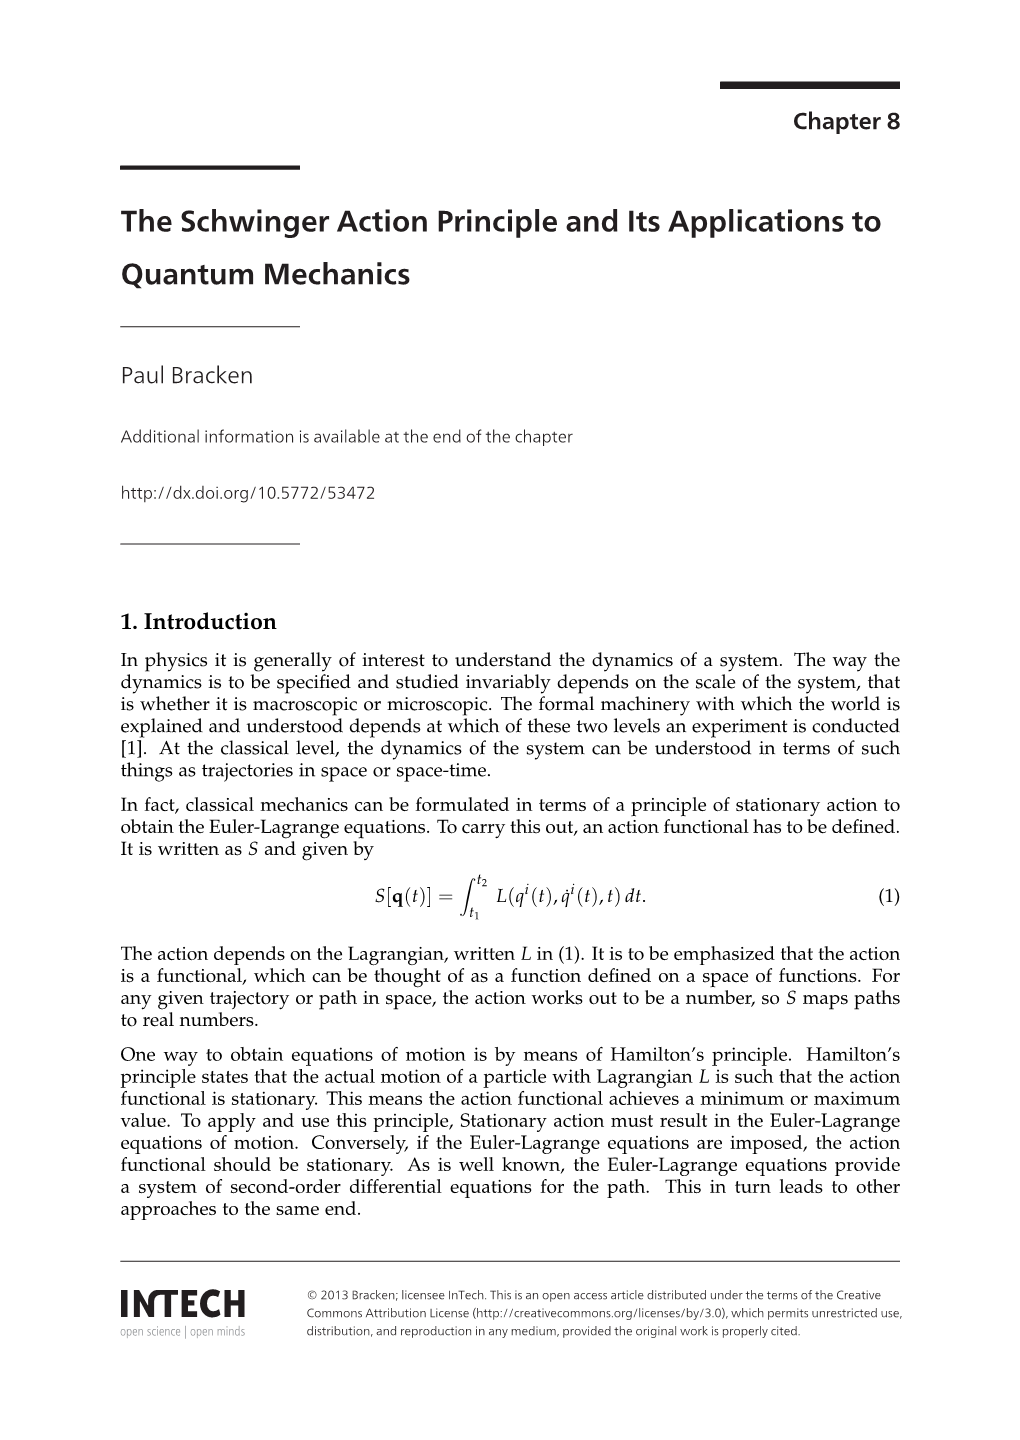 The Schwinger Action Principle and Its Applications to Quantum Mechanics